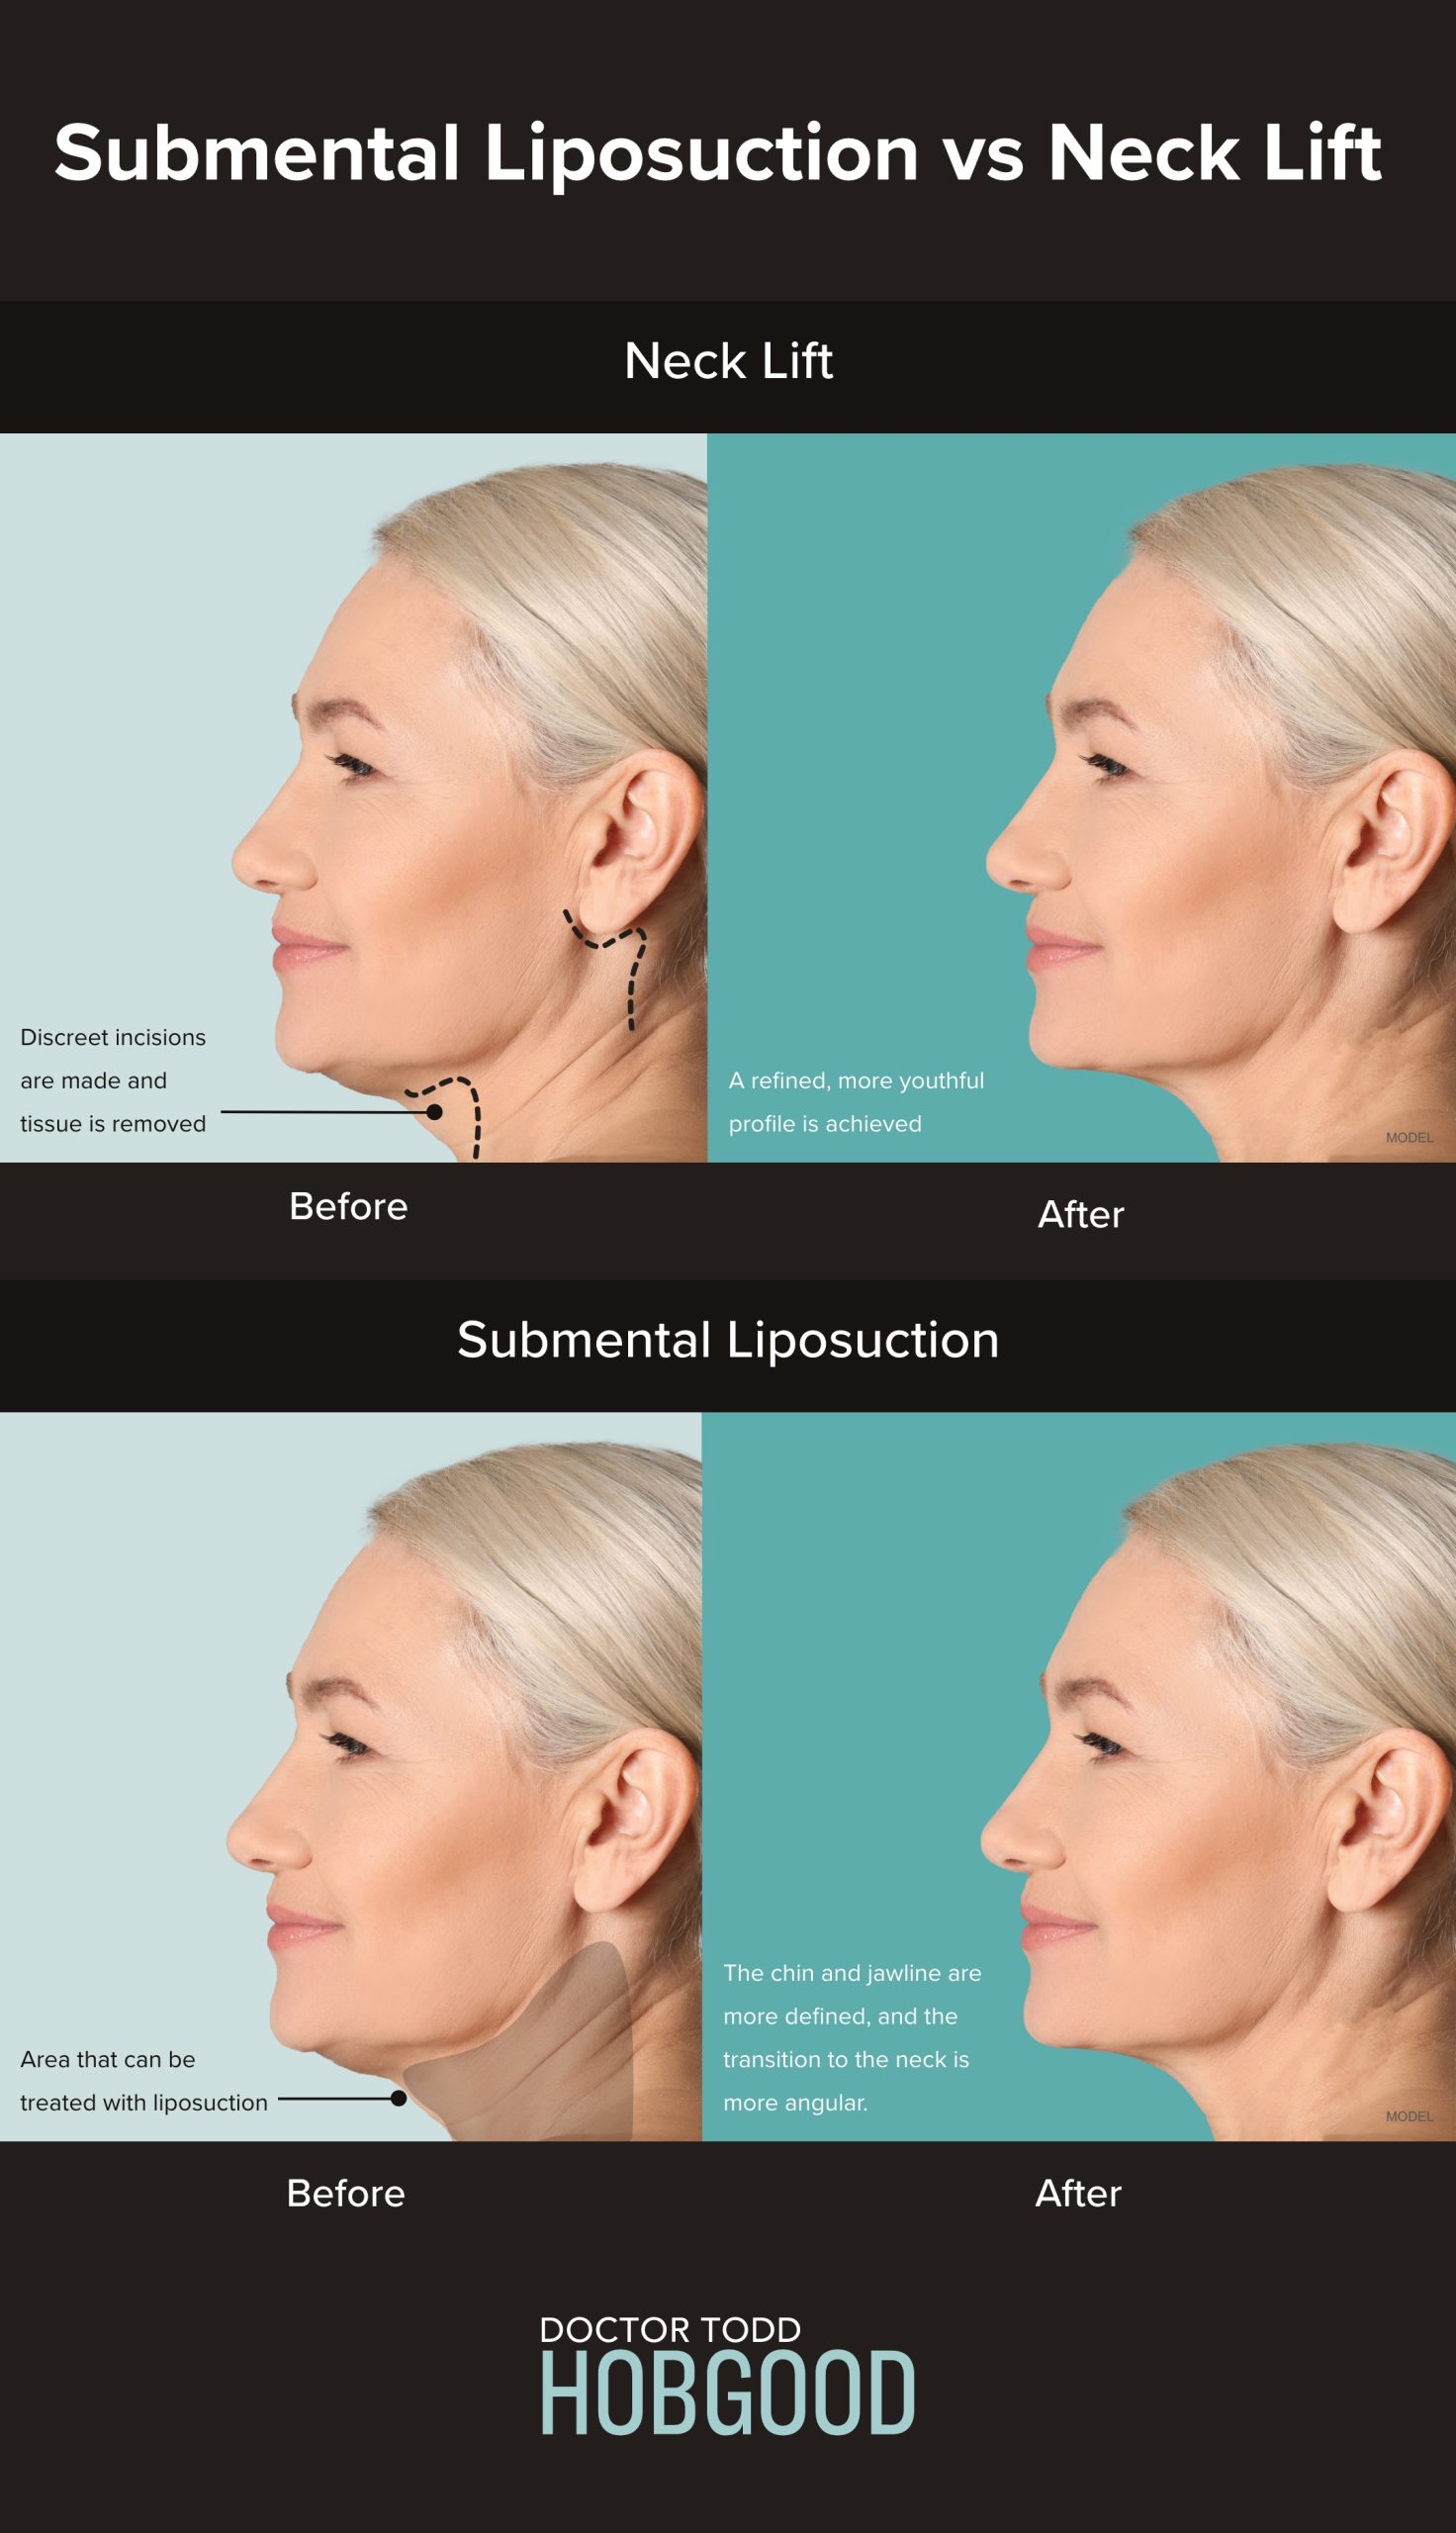 Liposuction, Neck Lift, or Nonsurgical Neck Lift: What's Best for